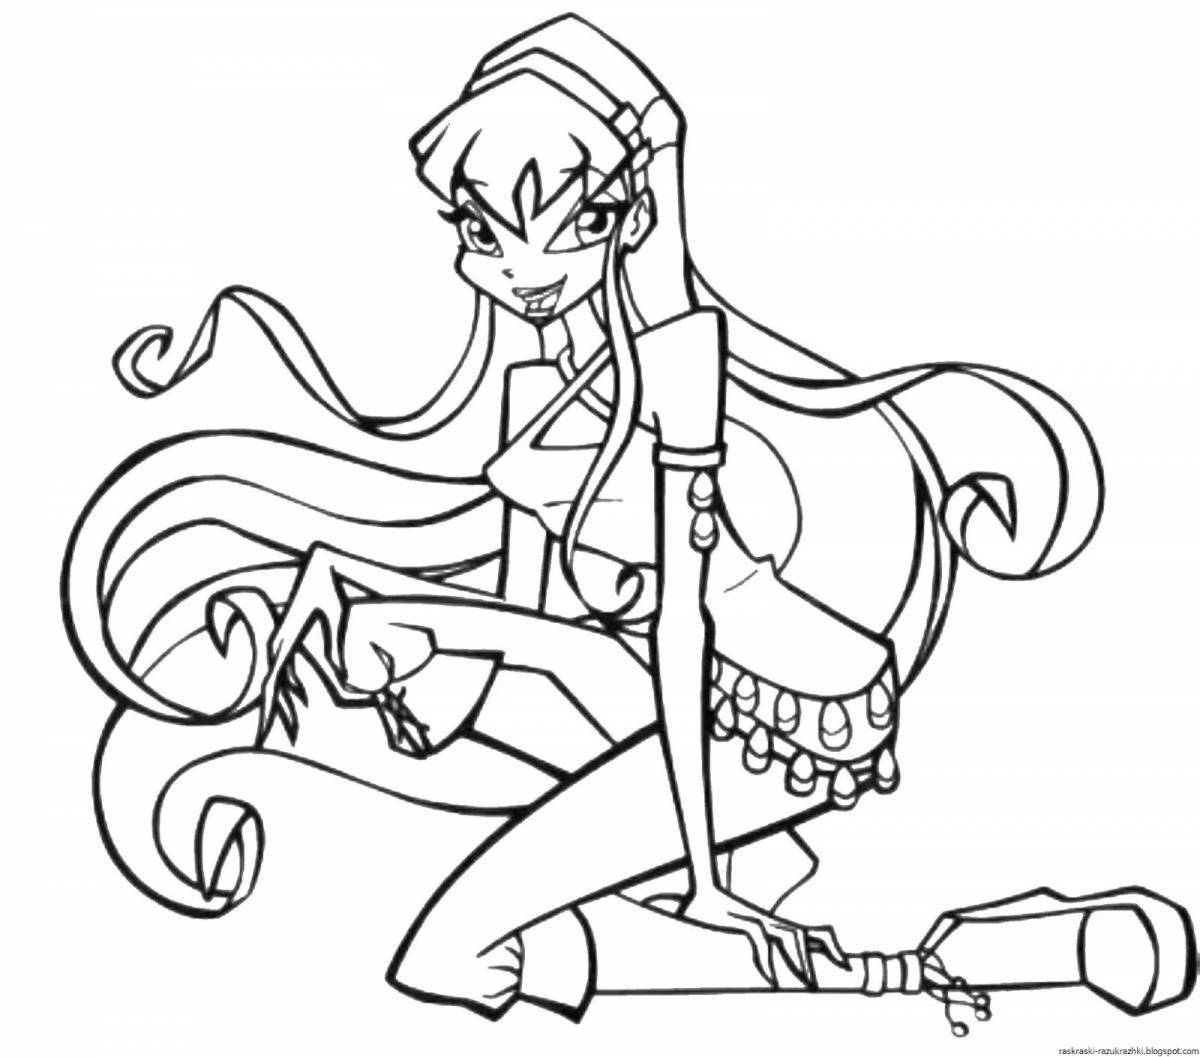 Winx games awesome coloring pages